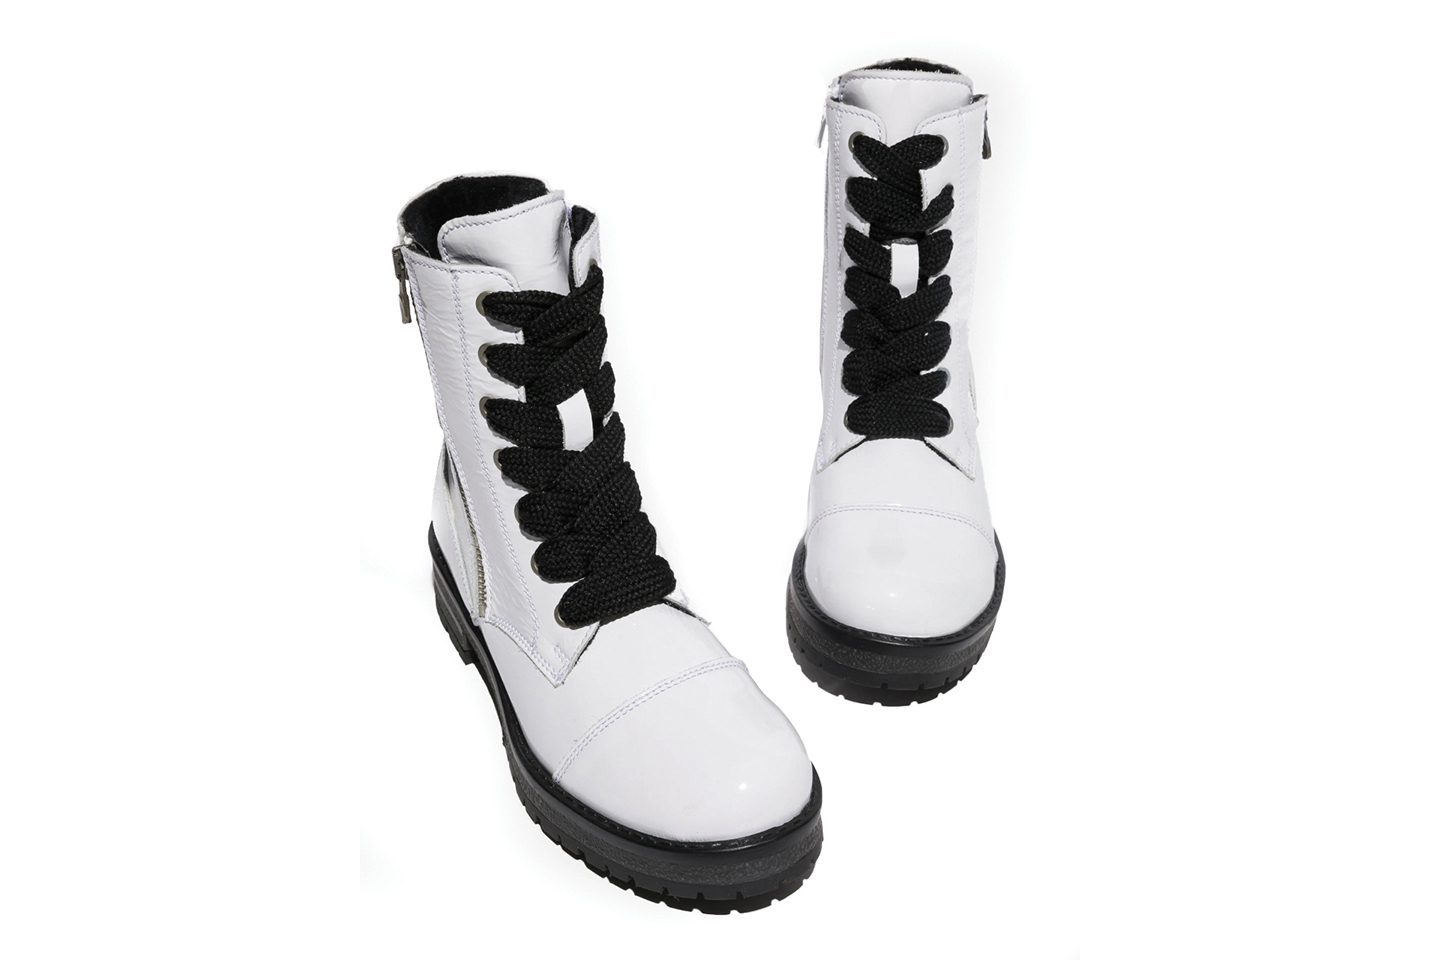 waterproof patent leather black and white boots